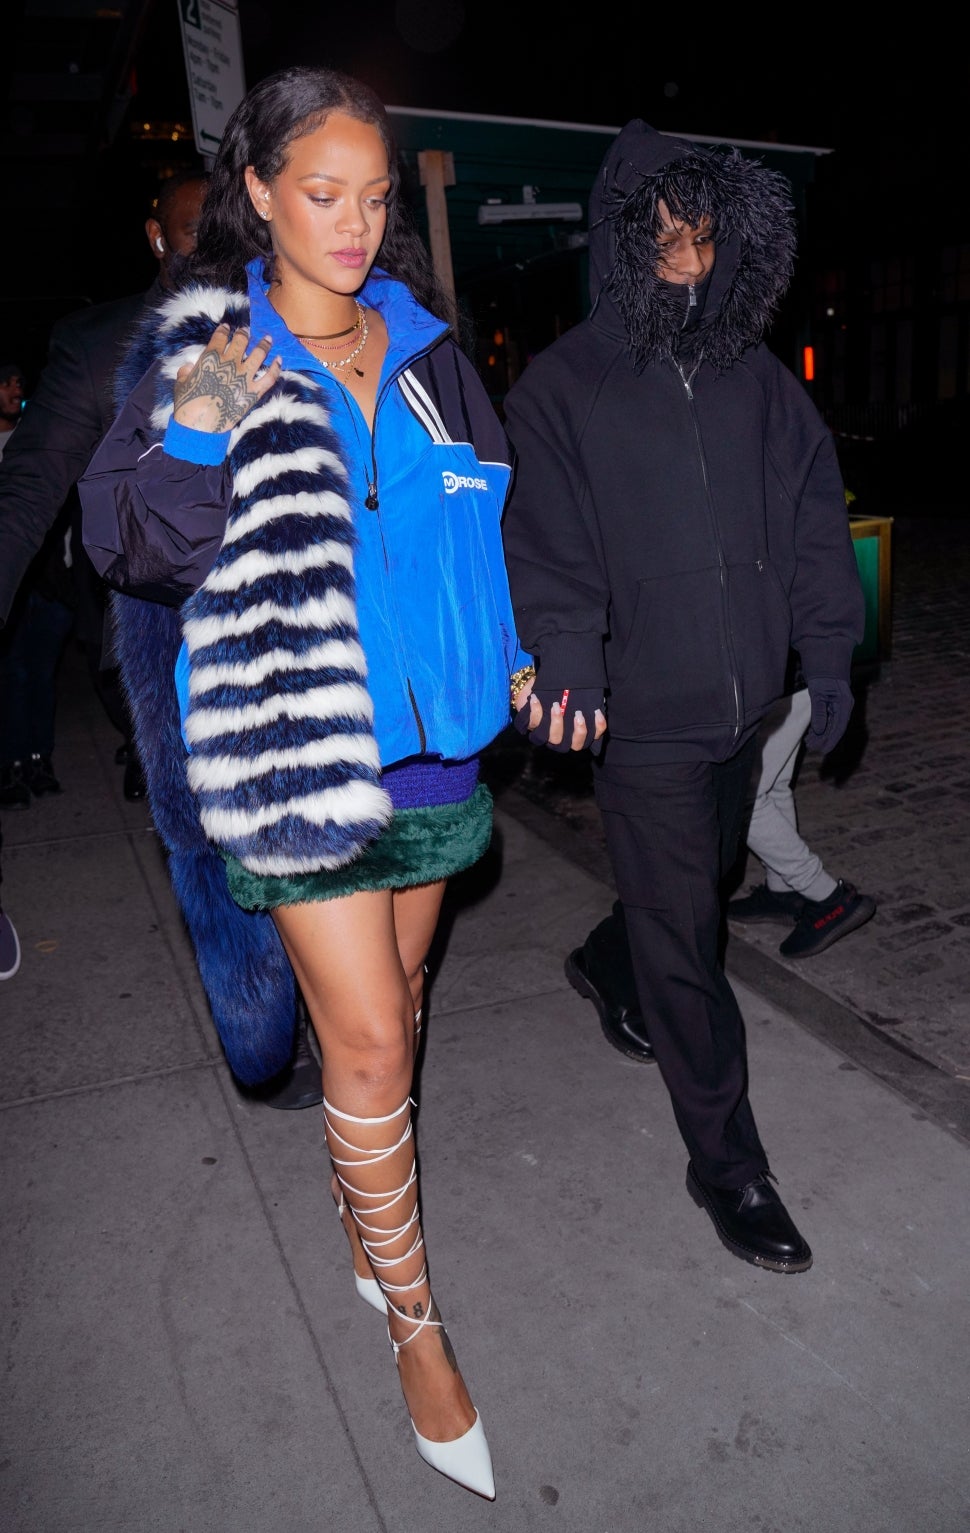 Rihanna and A$AP Rocky depart Pastis Restaurant on January 28, 2022 in New York City.